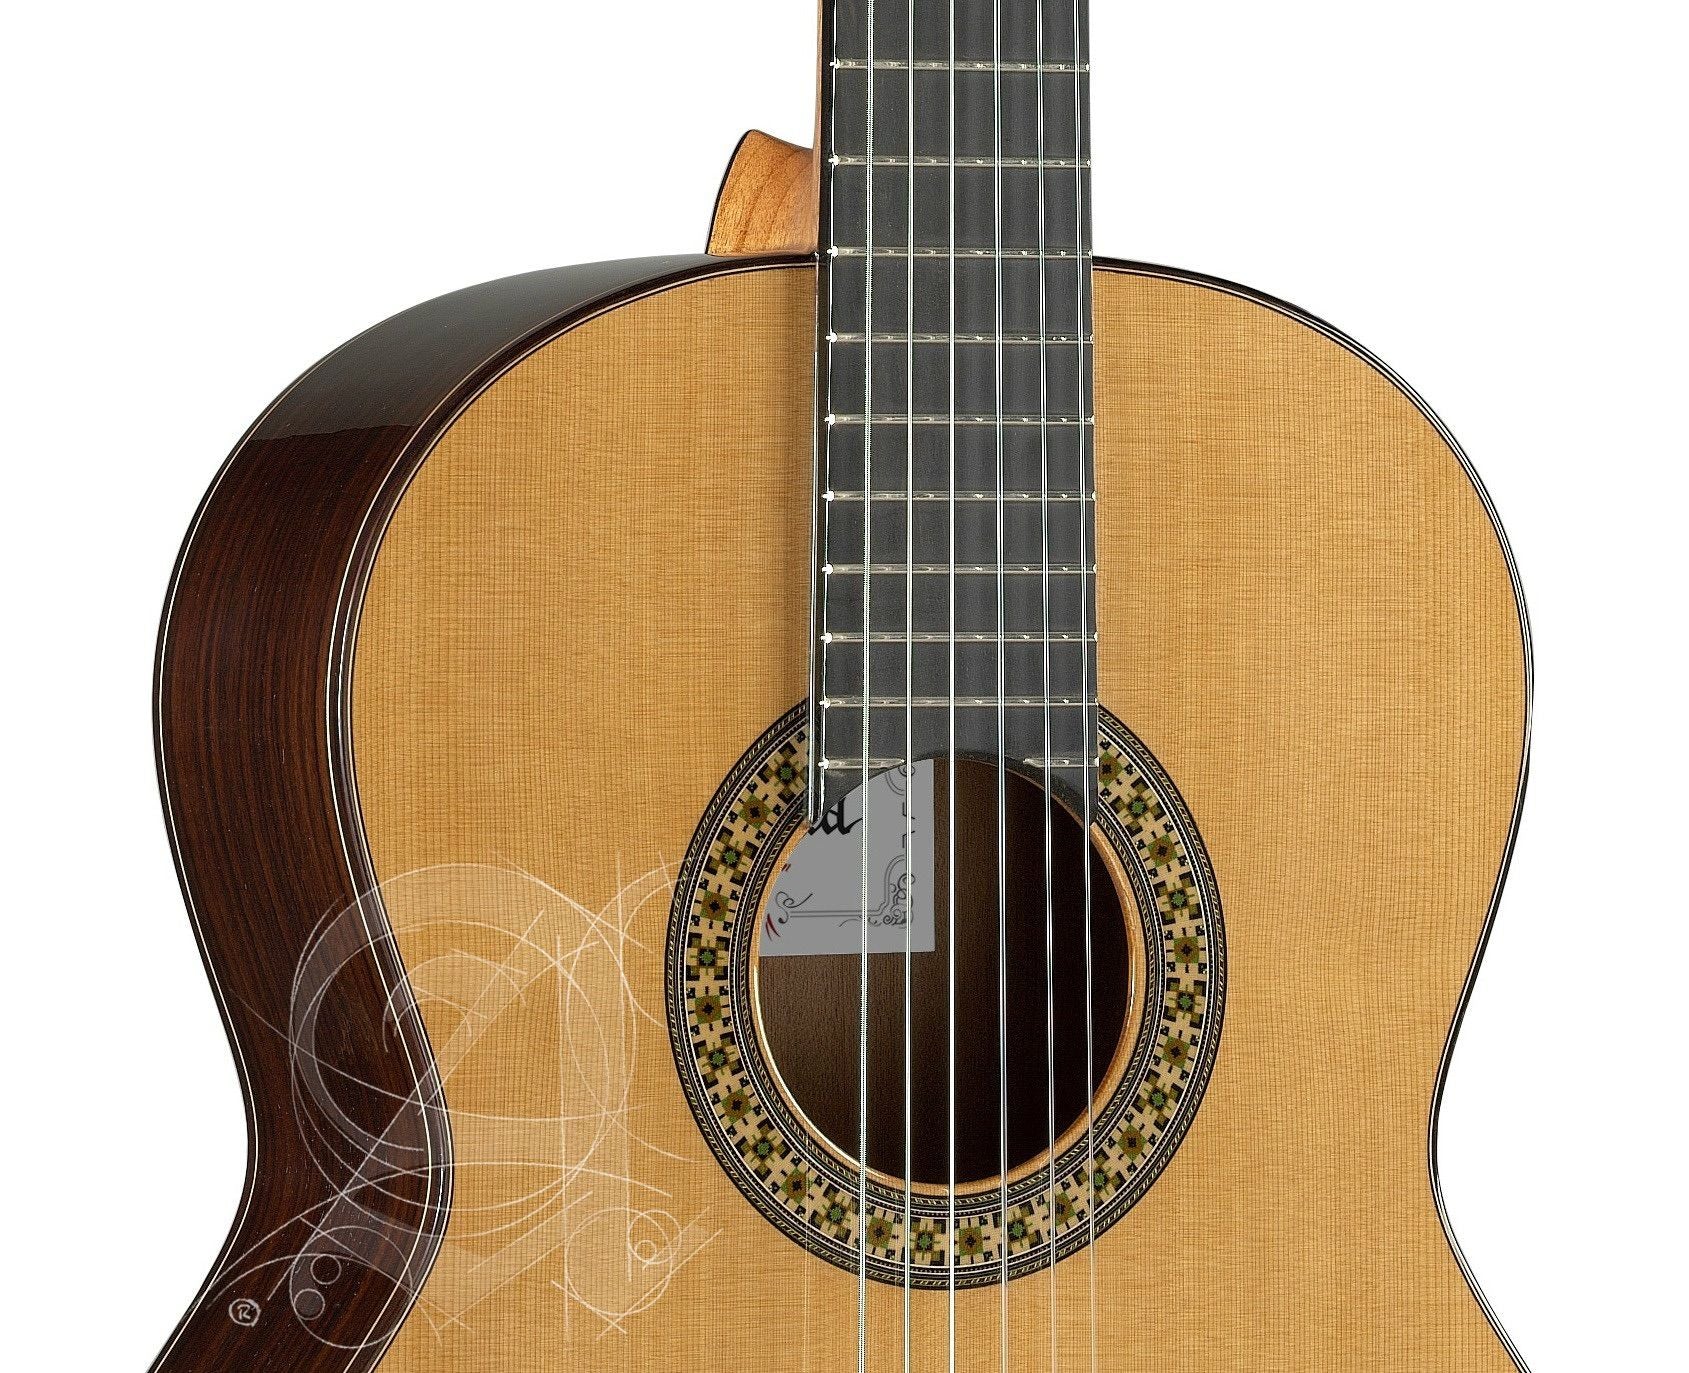 Accessories for Classical Guitar – The Long Island Violin Shop